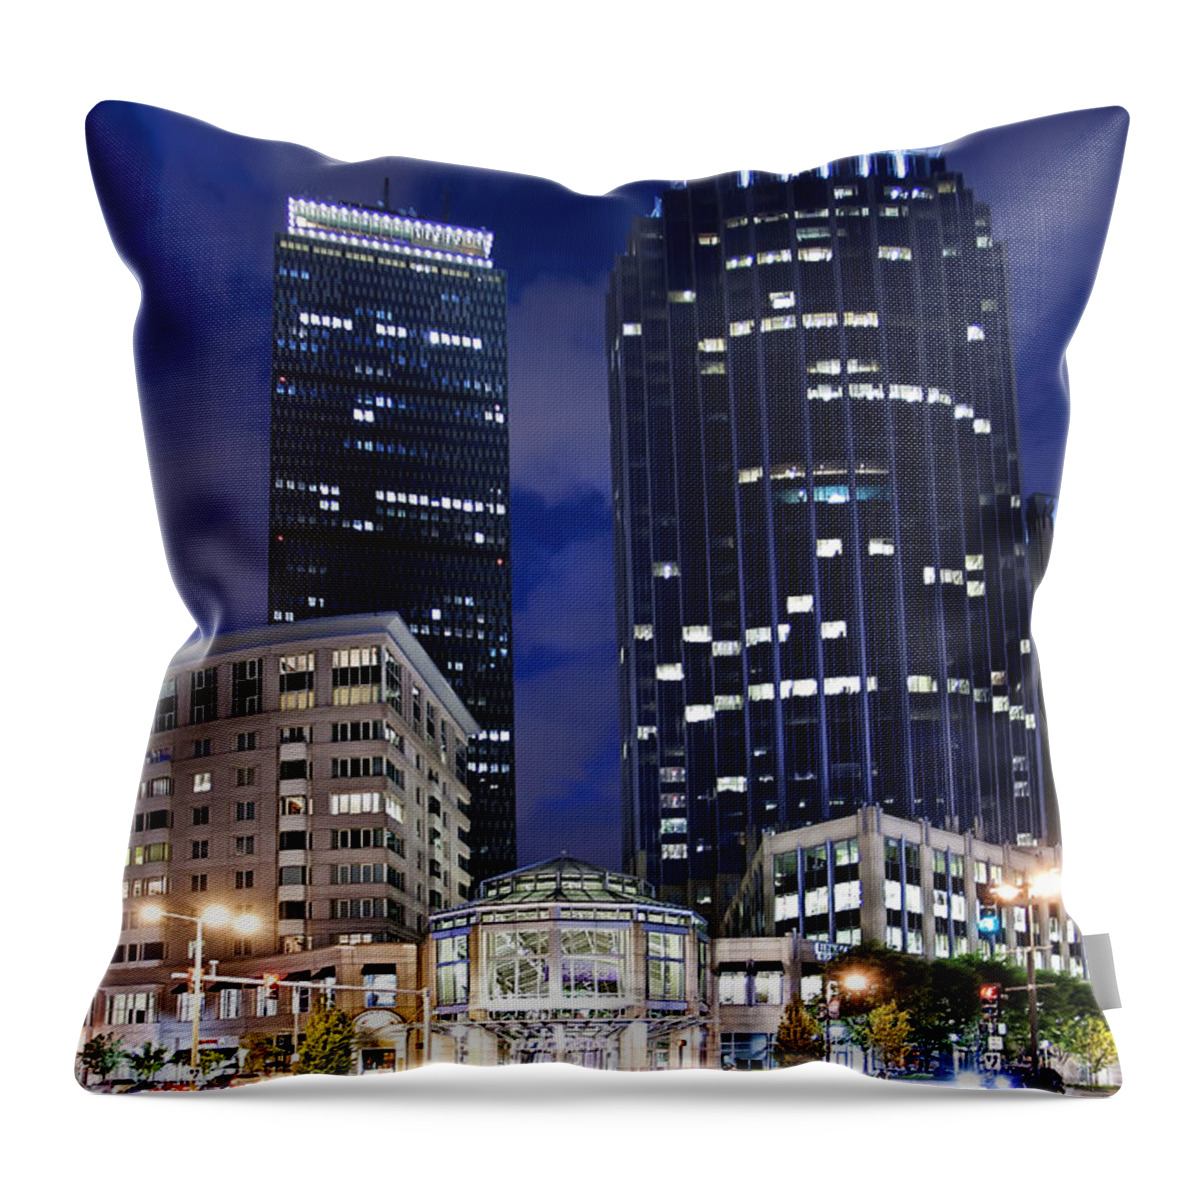 Estock Throw Pillow featuring the digital art Prudential Center, Boston, Ma by Claudia Uripos